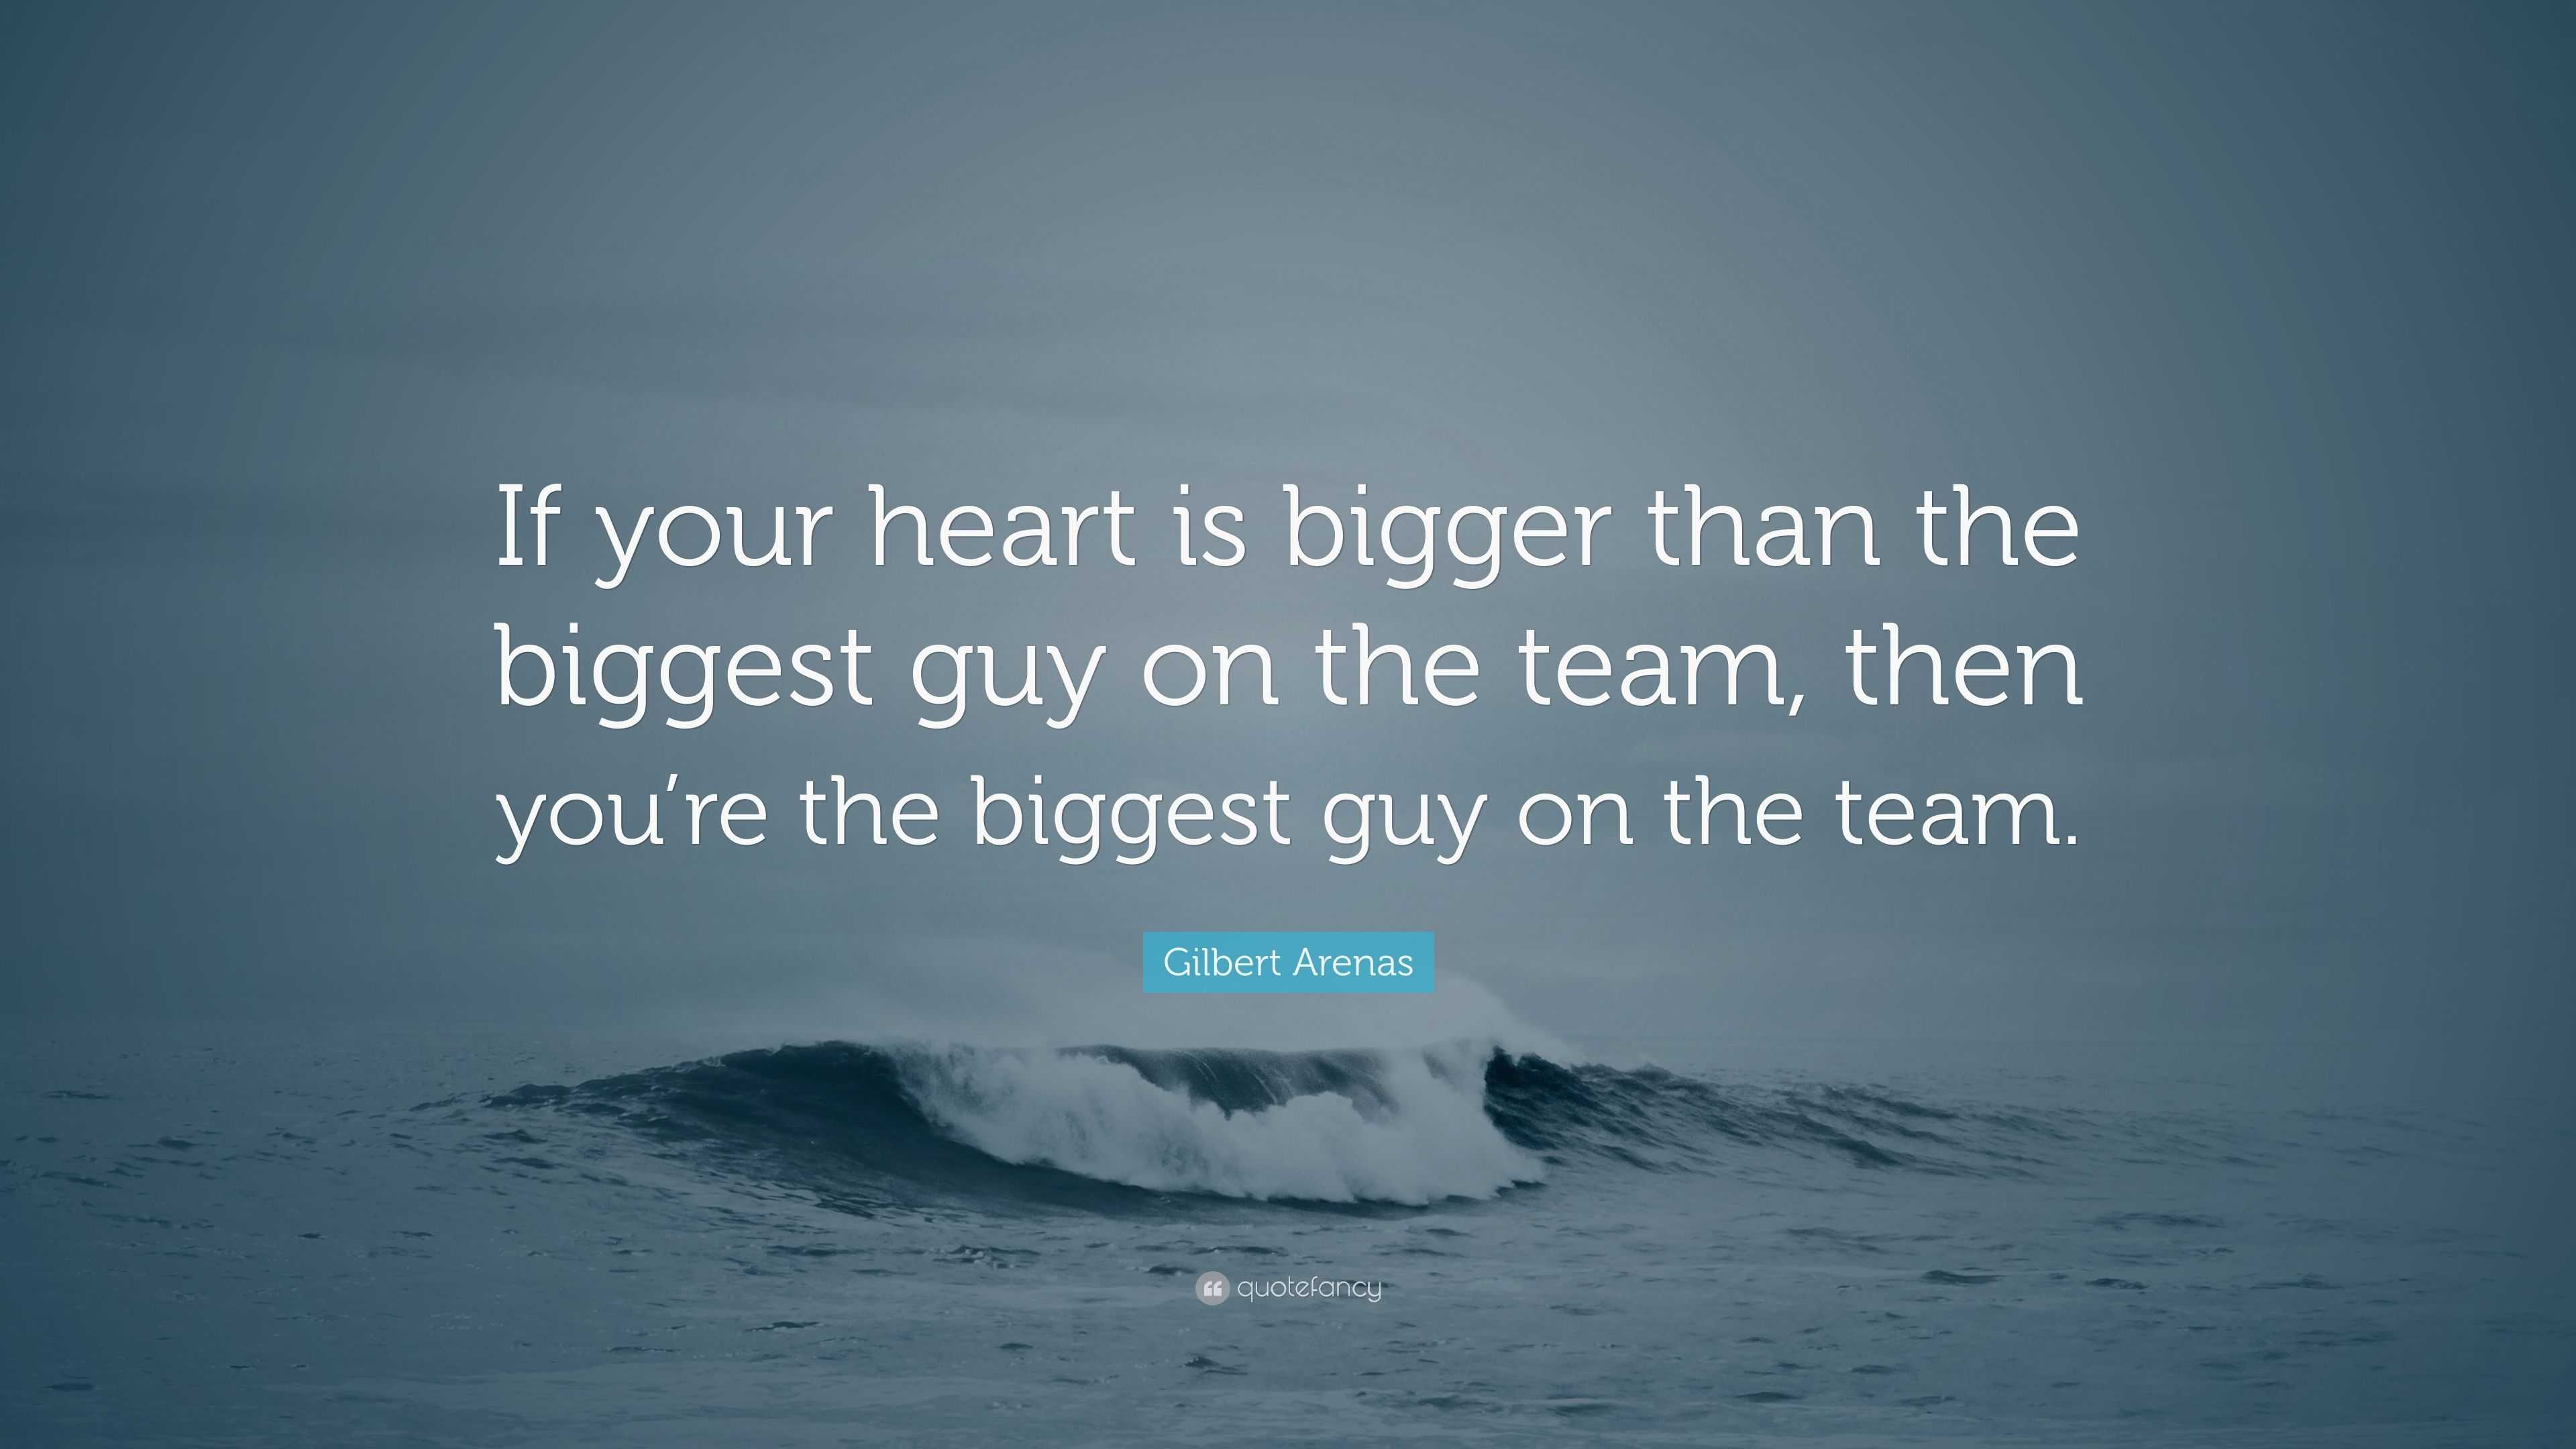 Gilbert Arenas Quote: “If your heart is bigger than the biggest guy on